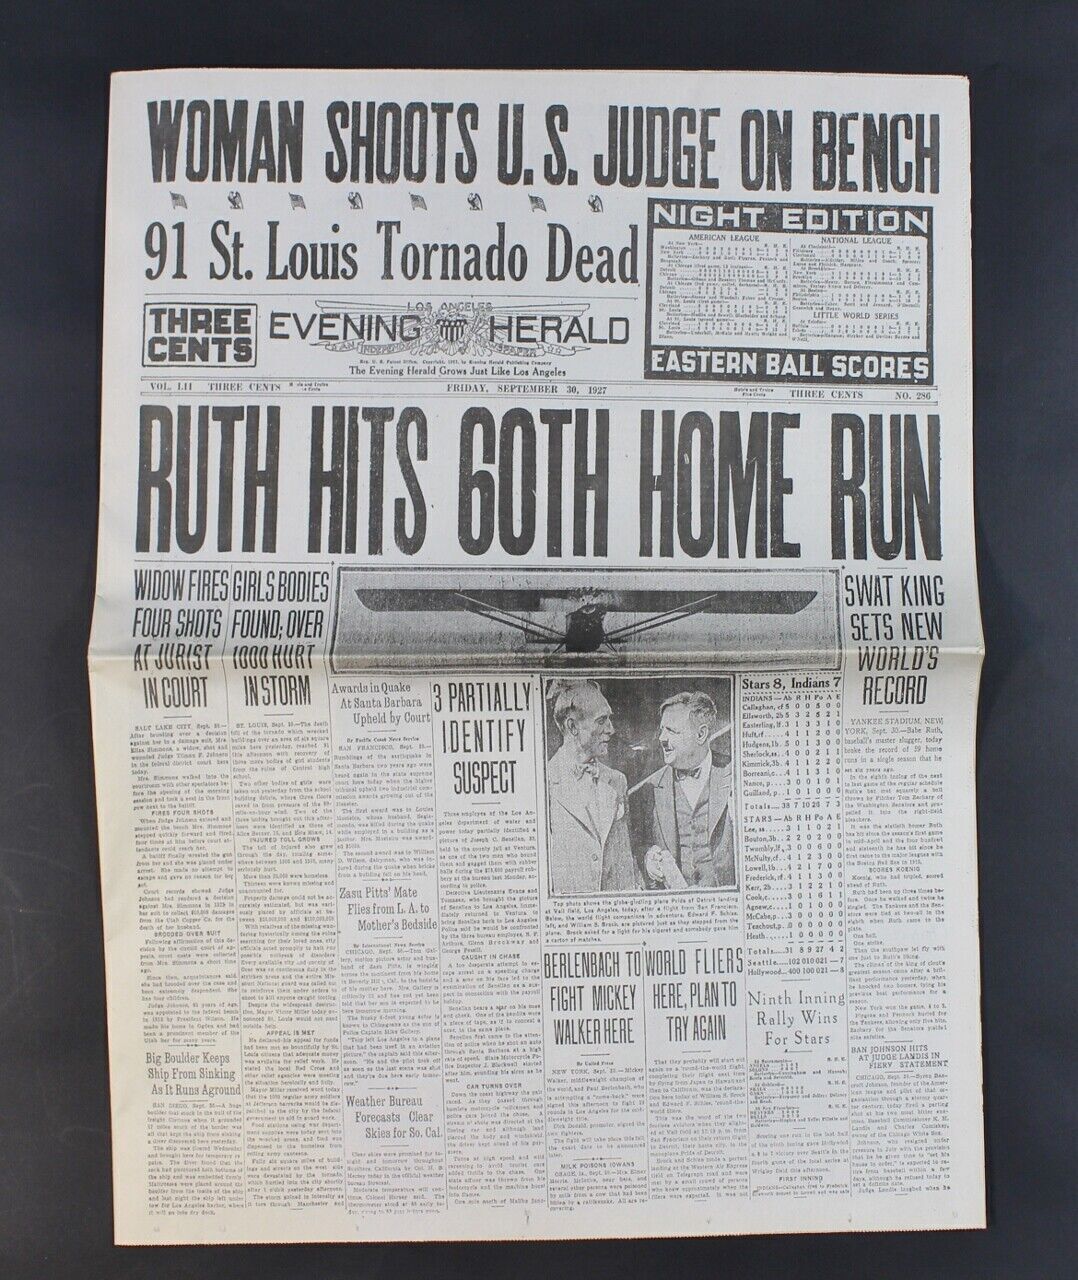 September 30 1927 Babe Ruth 60th Home Run Los Angeles 1920's Vintage Newspaper